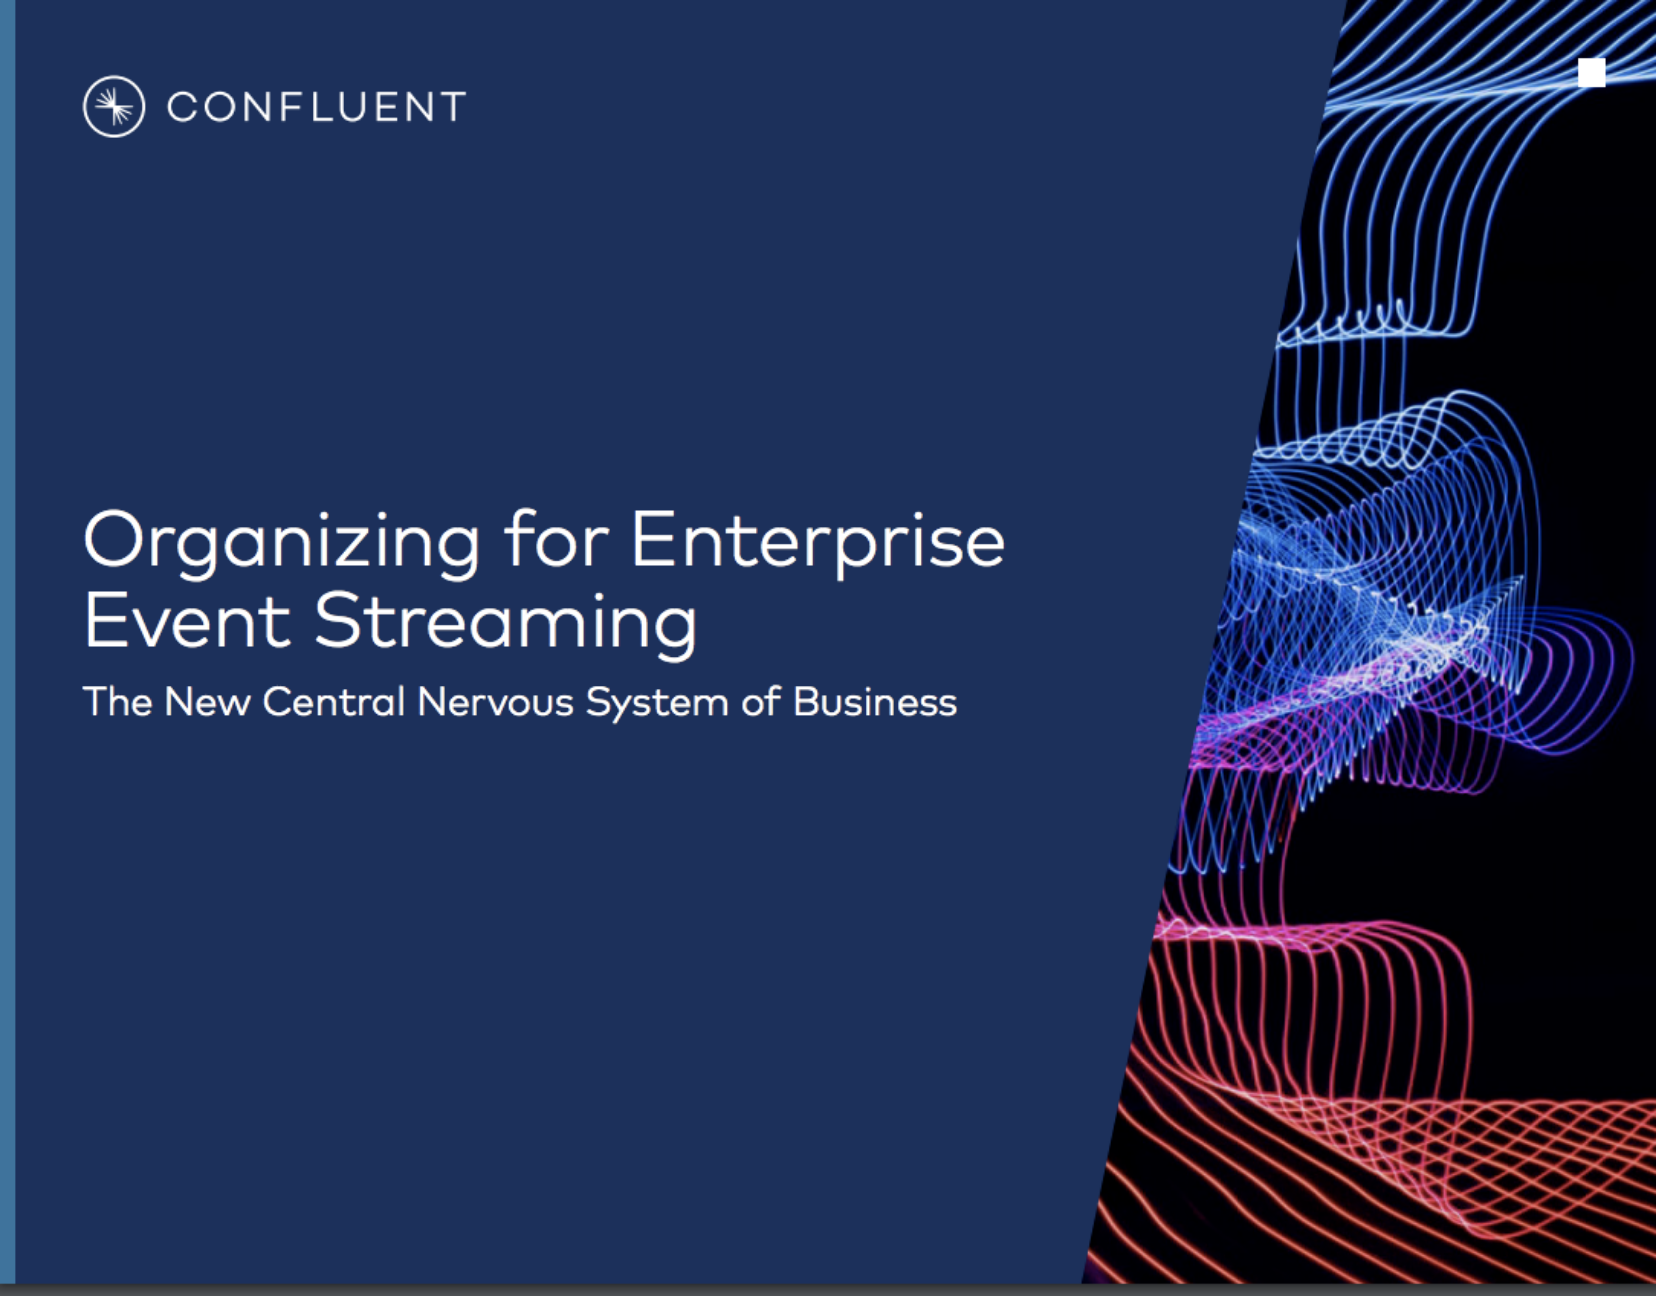 Screenshot 2020 10 22 20200929 EB Organizing for Enterprise Event Streaming The New Central Nervous System of Business pdf ... - Organizing for Enterprise Event Streaming: The New Central Nervous System of Business